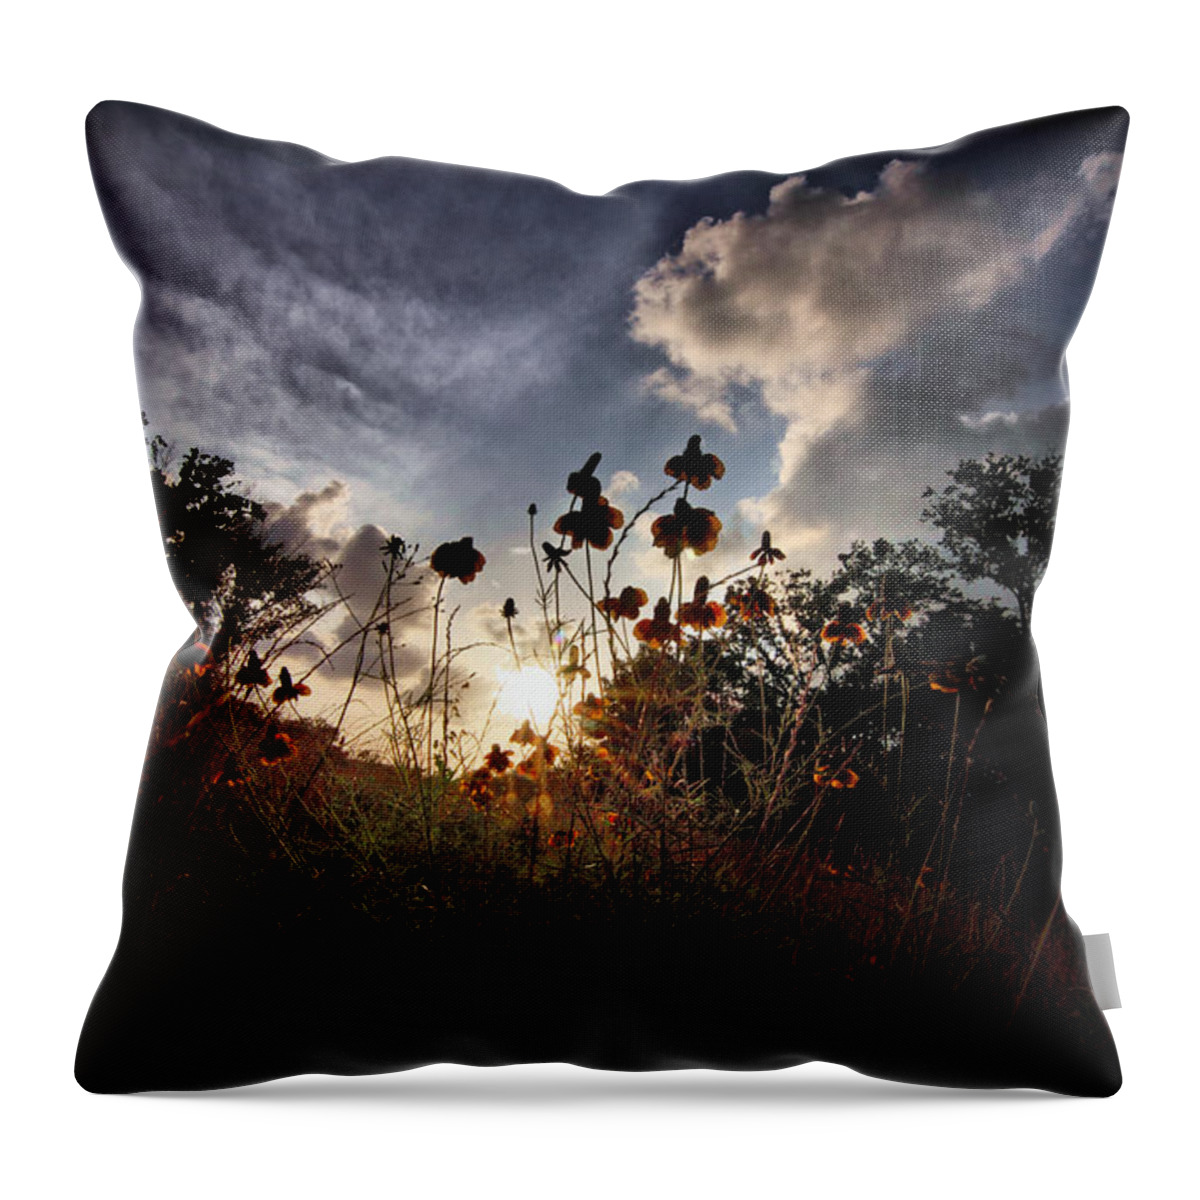 Flowers Throw Pillow featuring the digital art Sunset on Daisy by Linda Unger